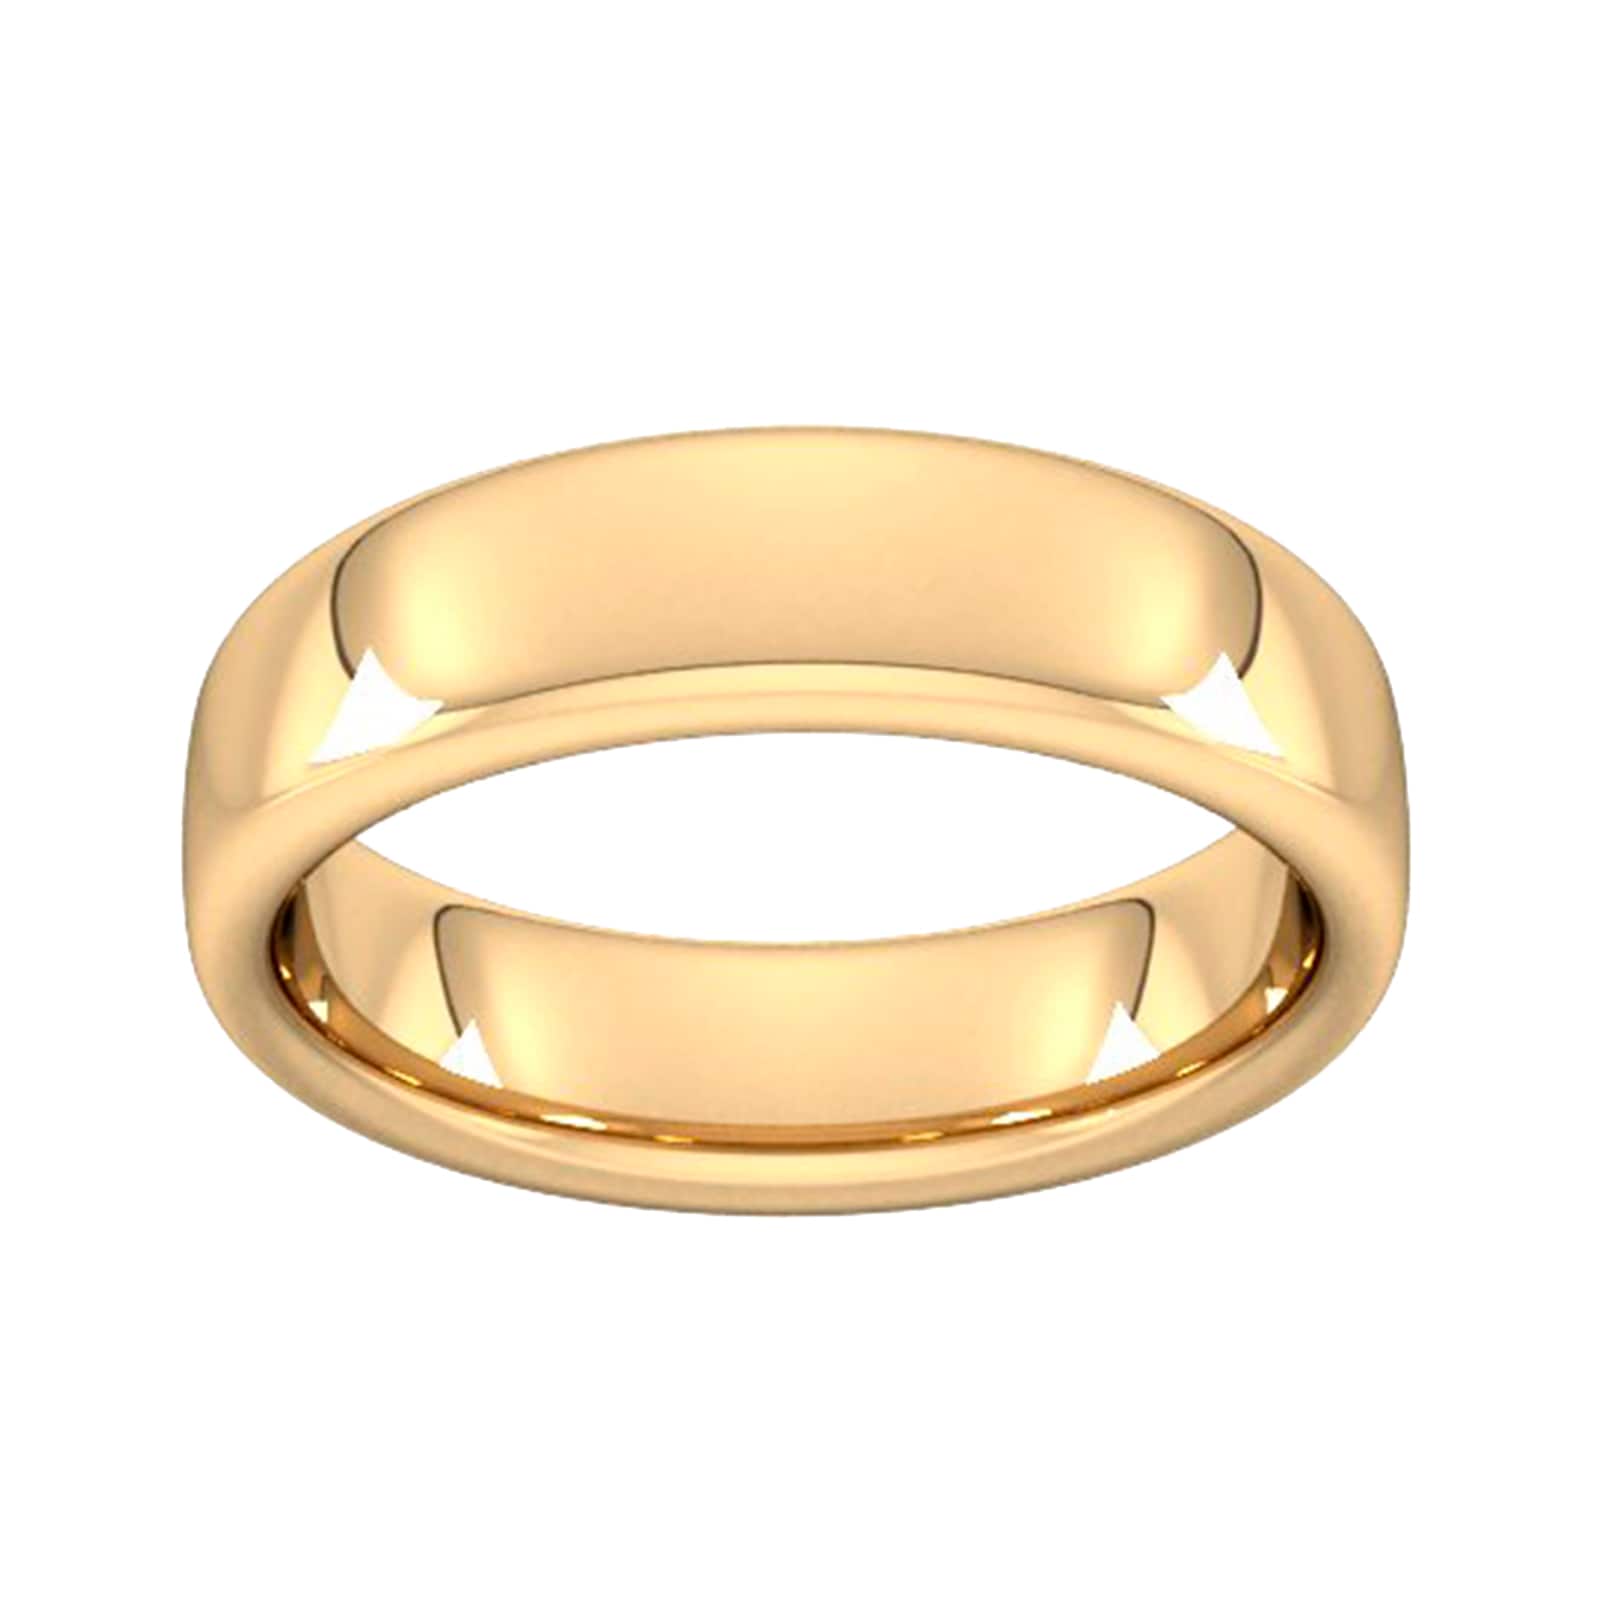 6mm Slight Court Extra Heavy Wedding Ring In 18 Carat Yellow Gold - Ring Size J